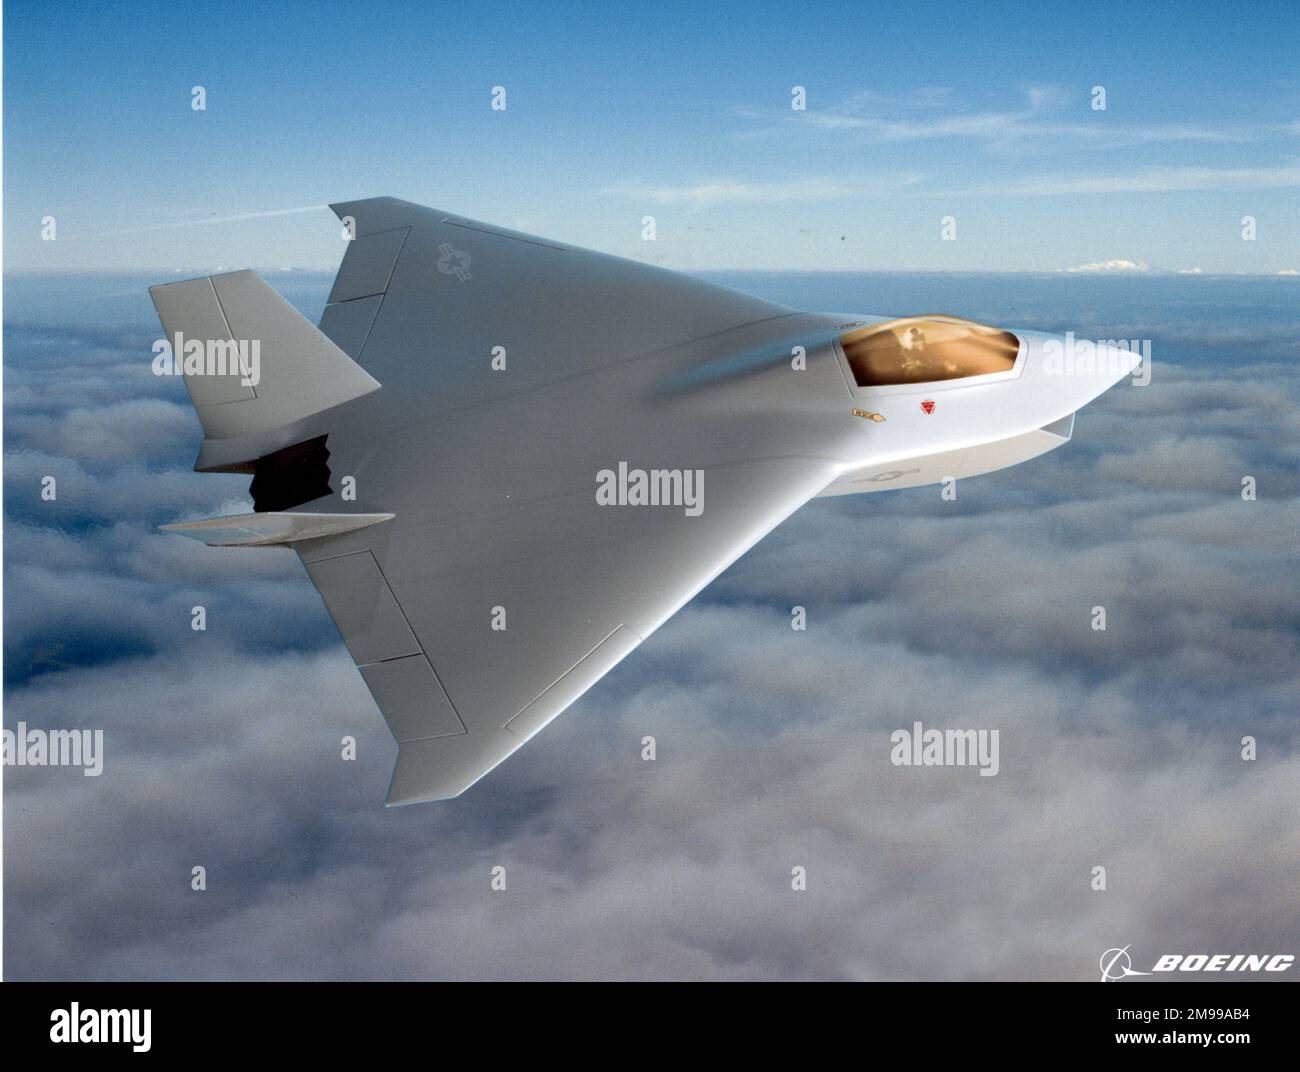 An artist?s impression of the Boeing entry in the Joint Strike Fighter (JSF) competition, two aircraft were built as the X-32 to participate in a concept demonstration against the Lockheed Martin X-35. Stock Photo